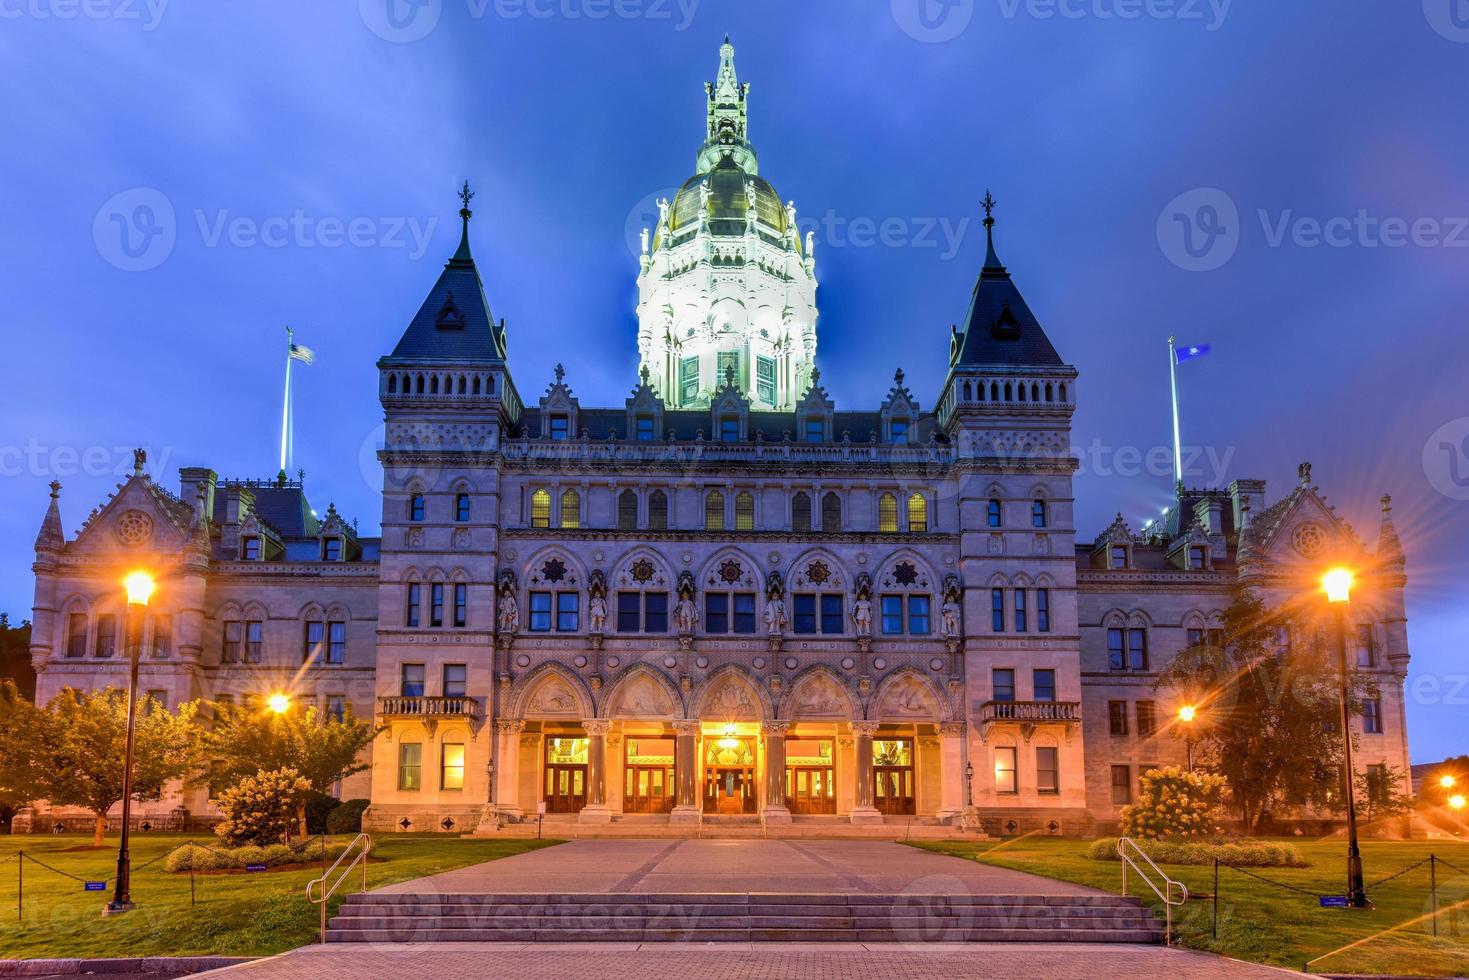 Connecticut State Capitol in Hartford on a summer evening. The building houses the State Senate, the House of Representatives and the office of the Governor. photo